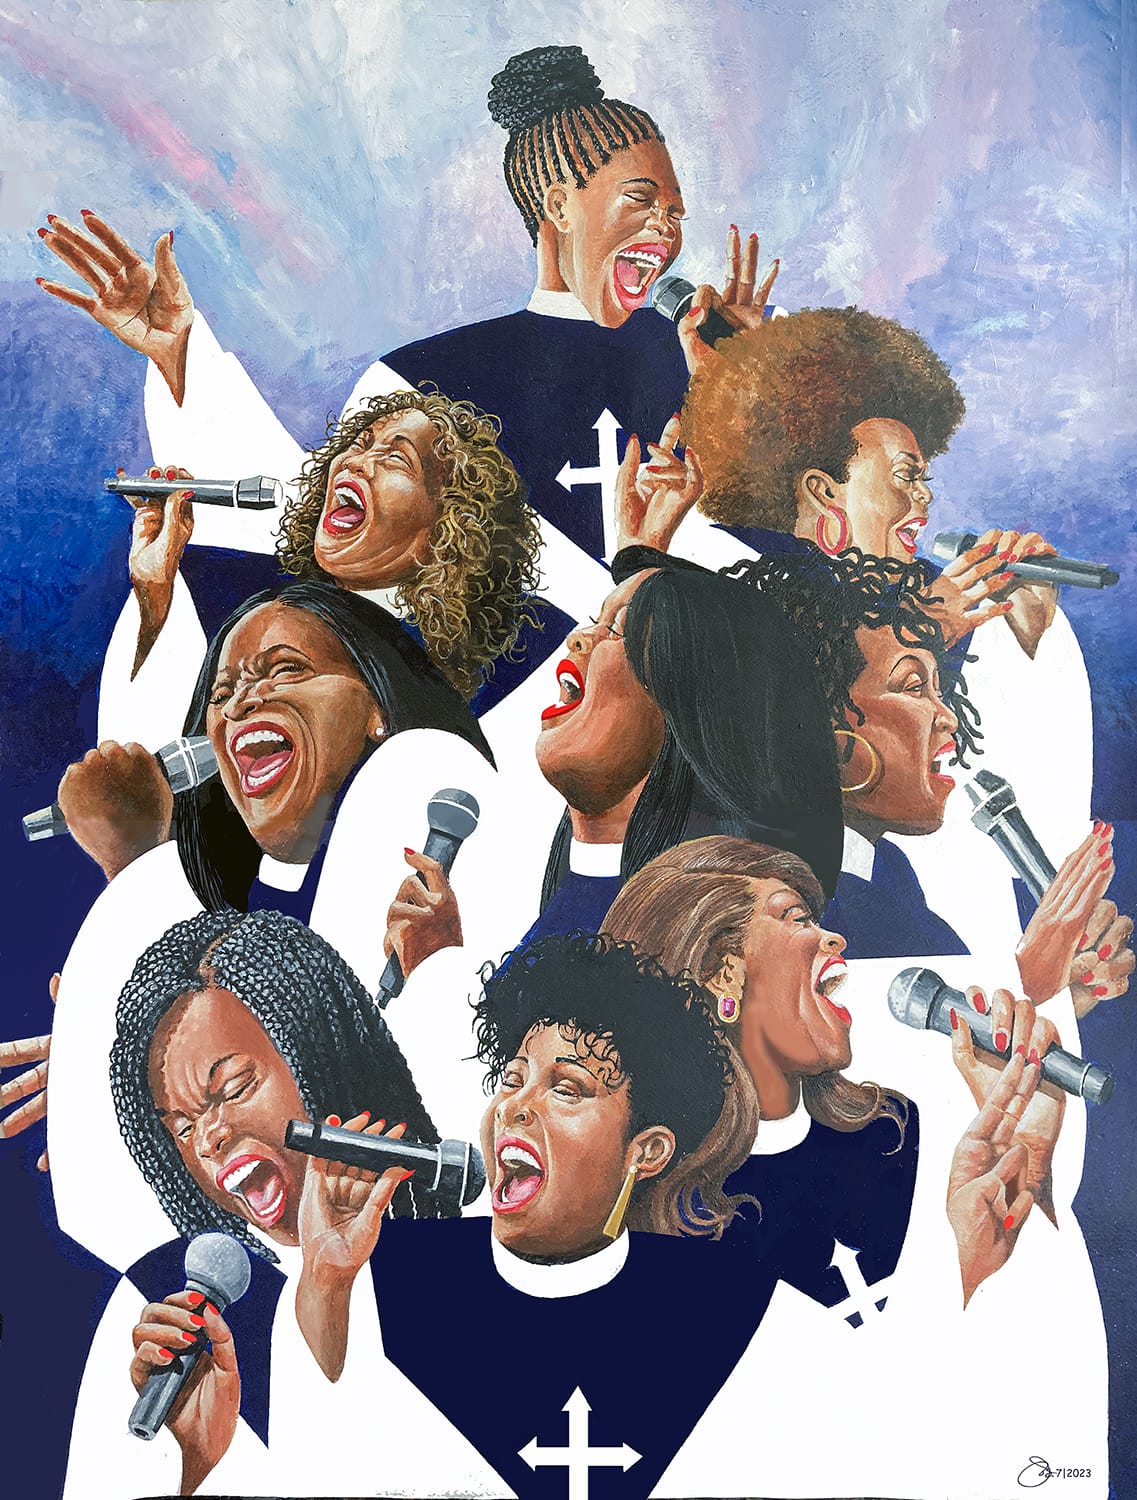 Artwork featuring Black women in church robes singing with passion